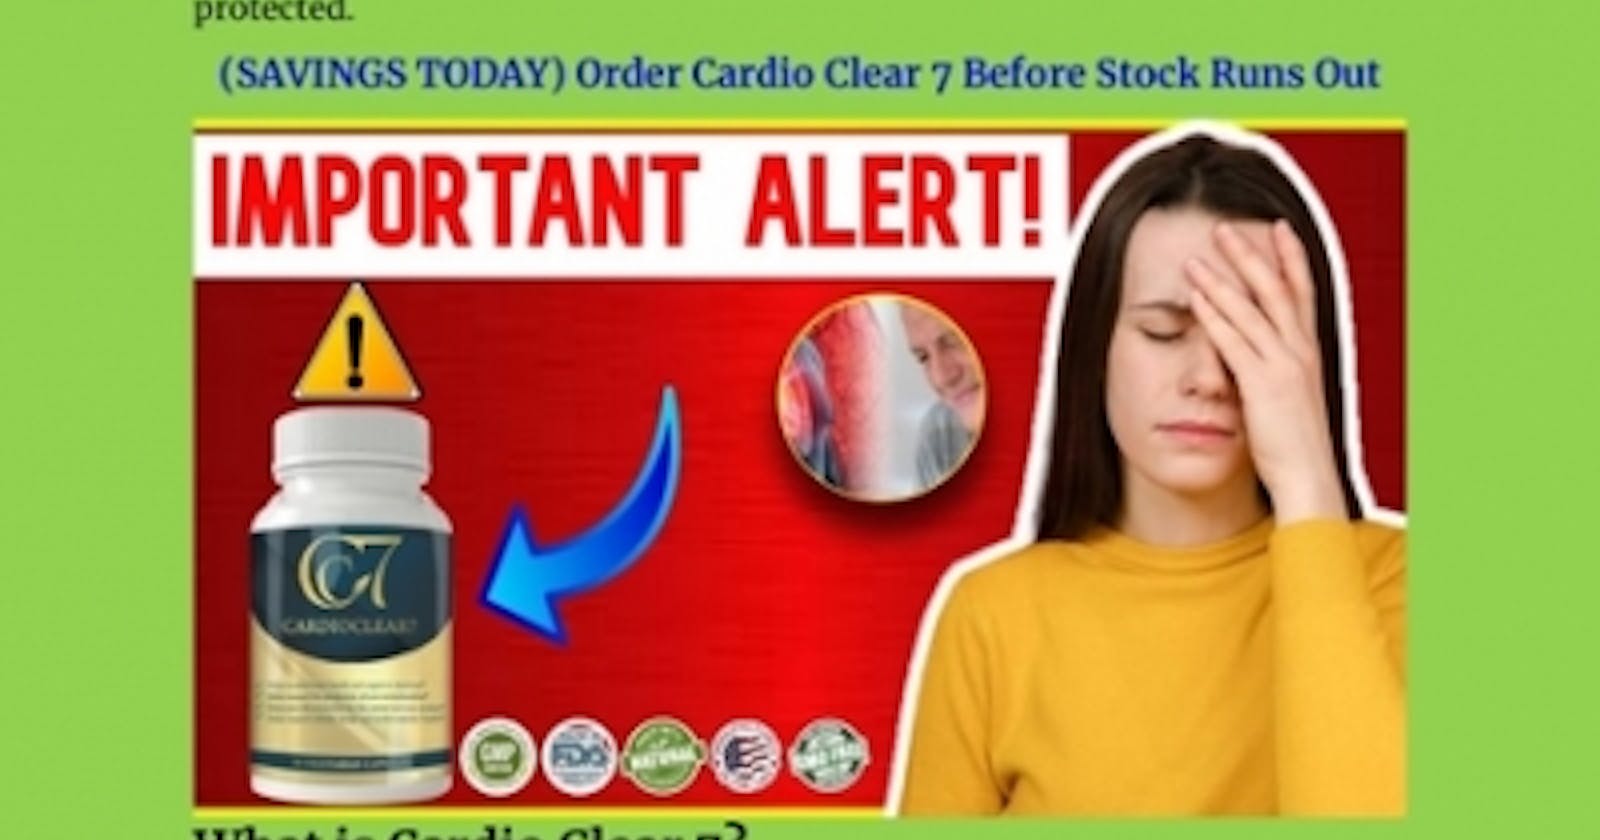 Cardio Clear 7 Reviews - What to Know Before Buy!